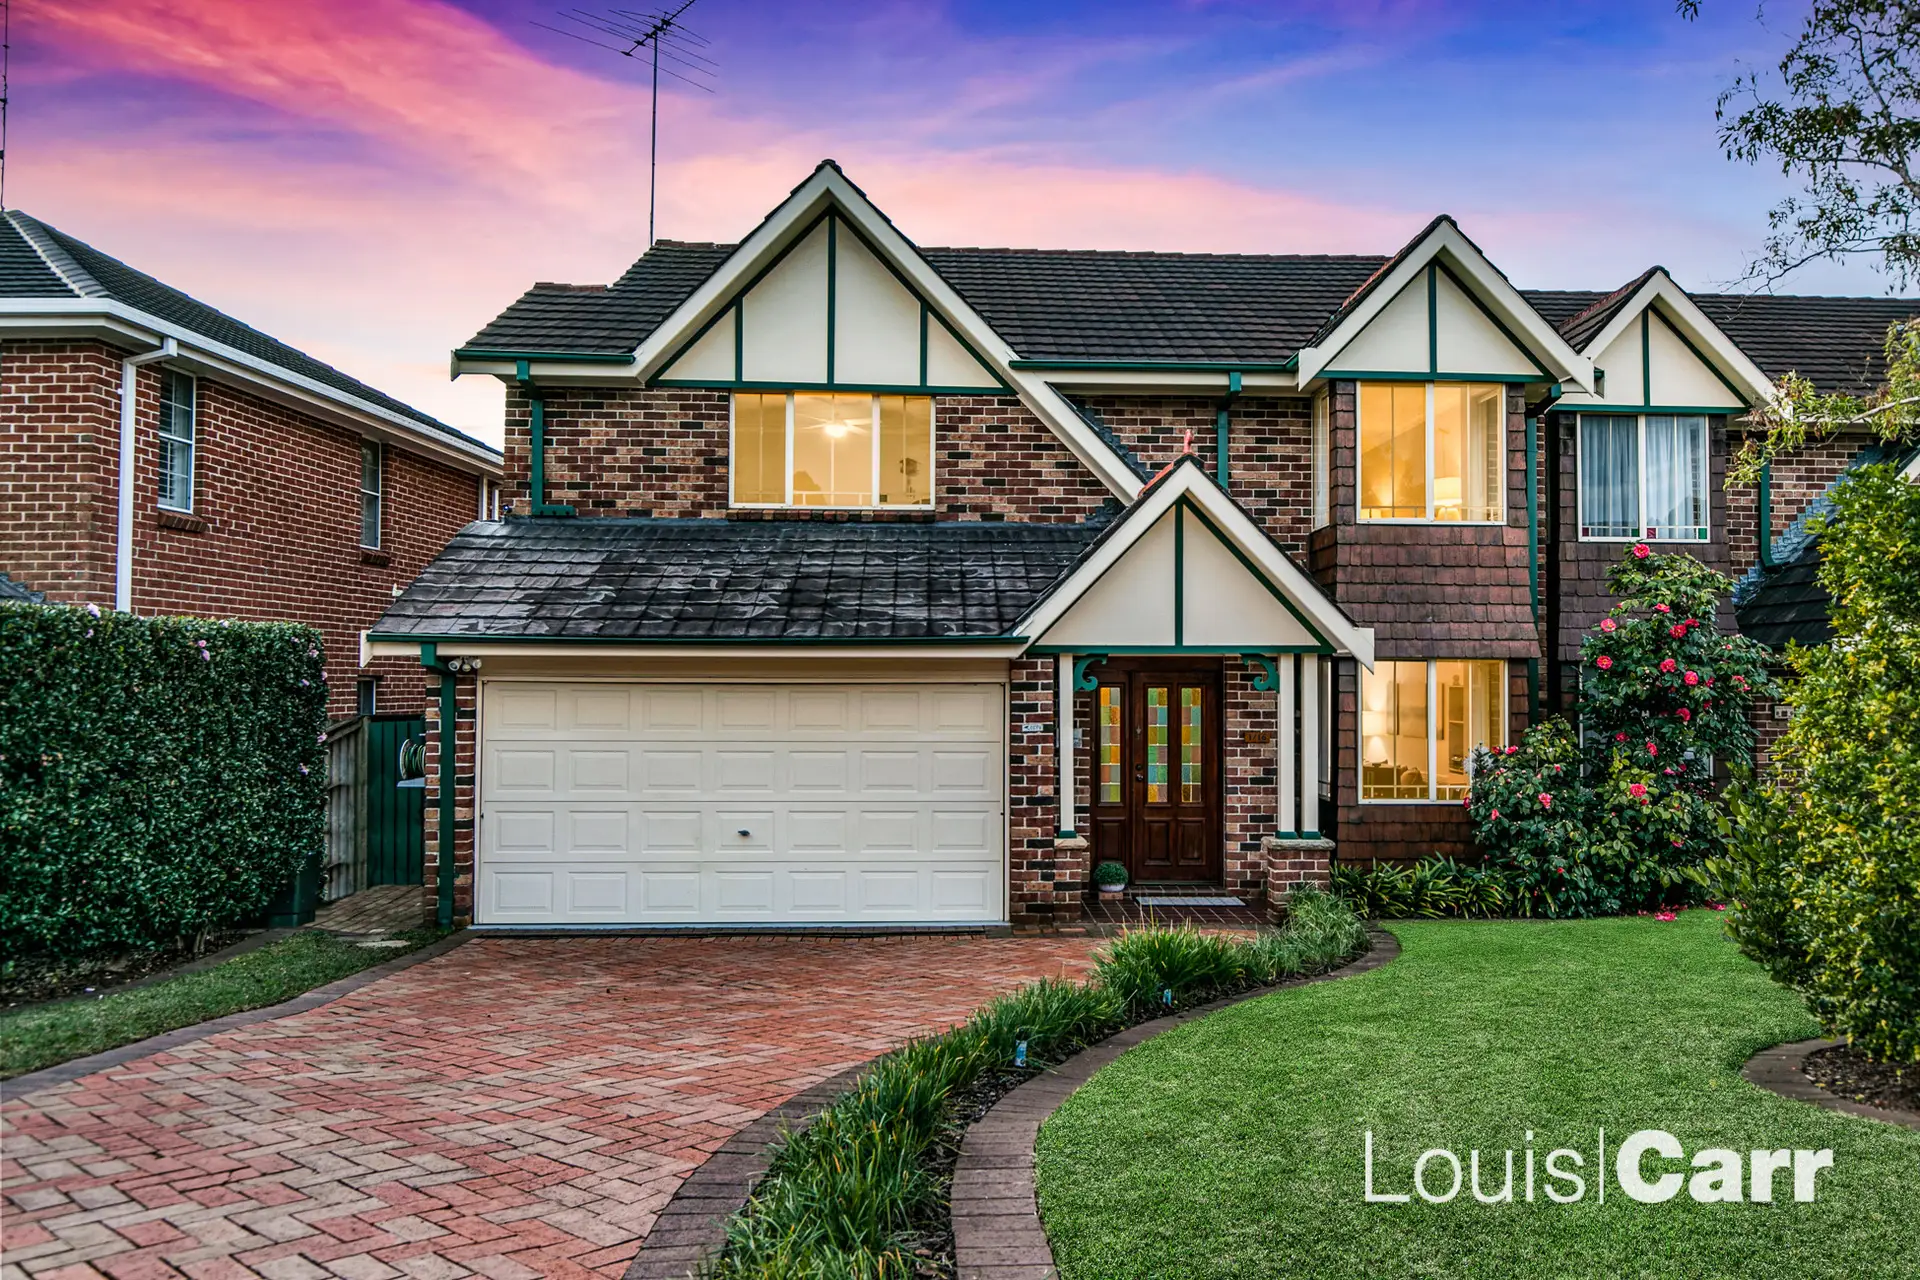 Photo #1: 1/16 Darlington Drive, Cherrybrook - Sold by Louis Carr Real Estate